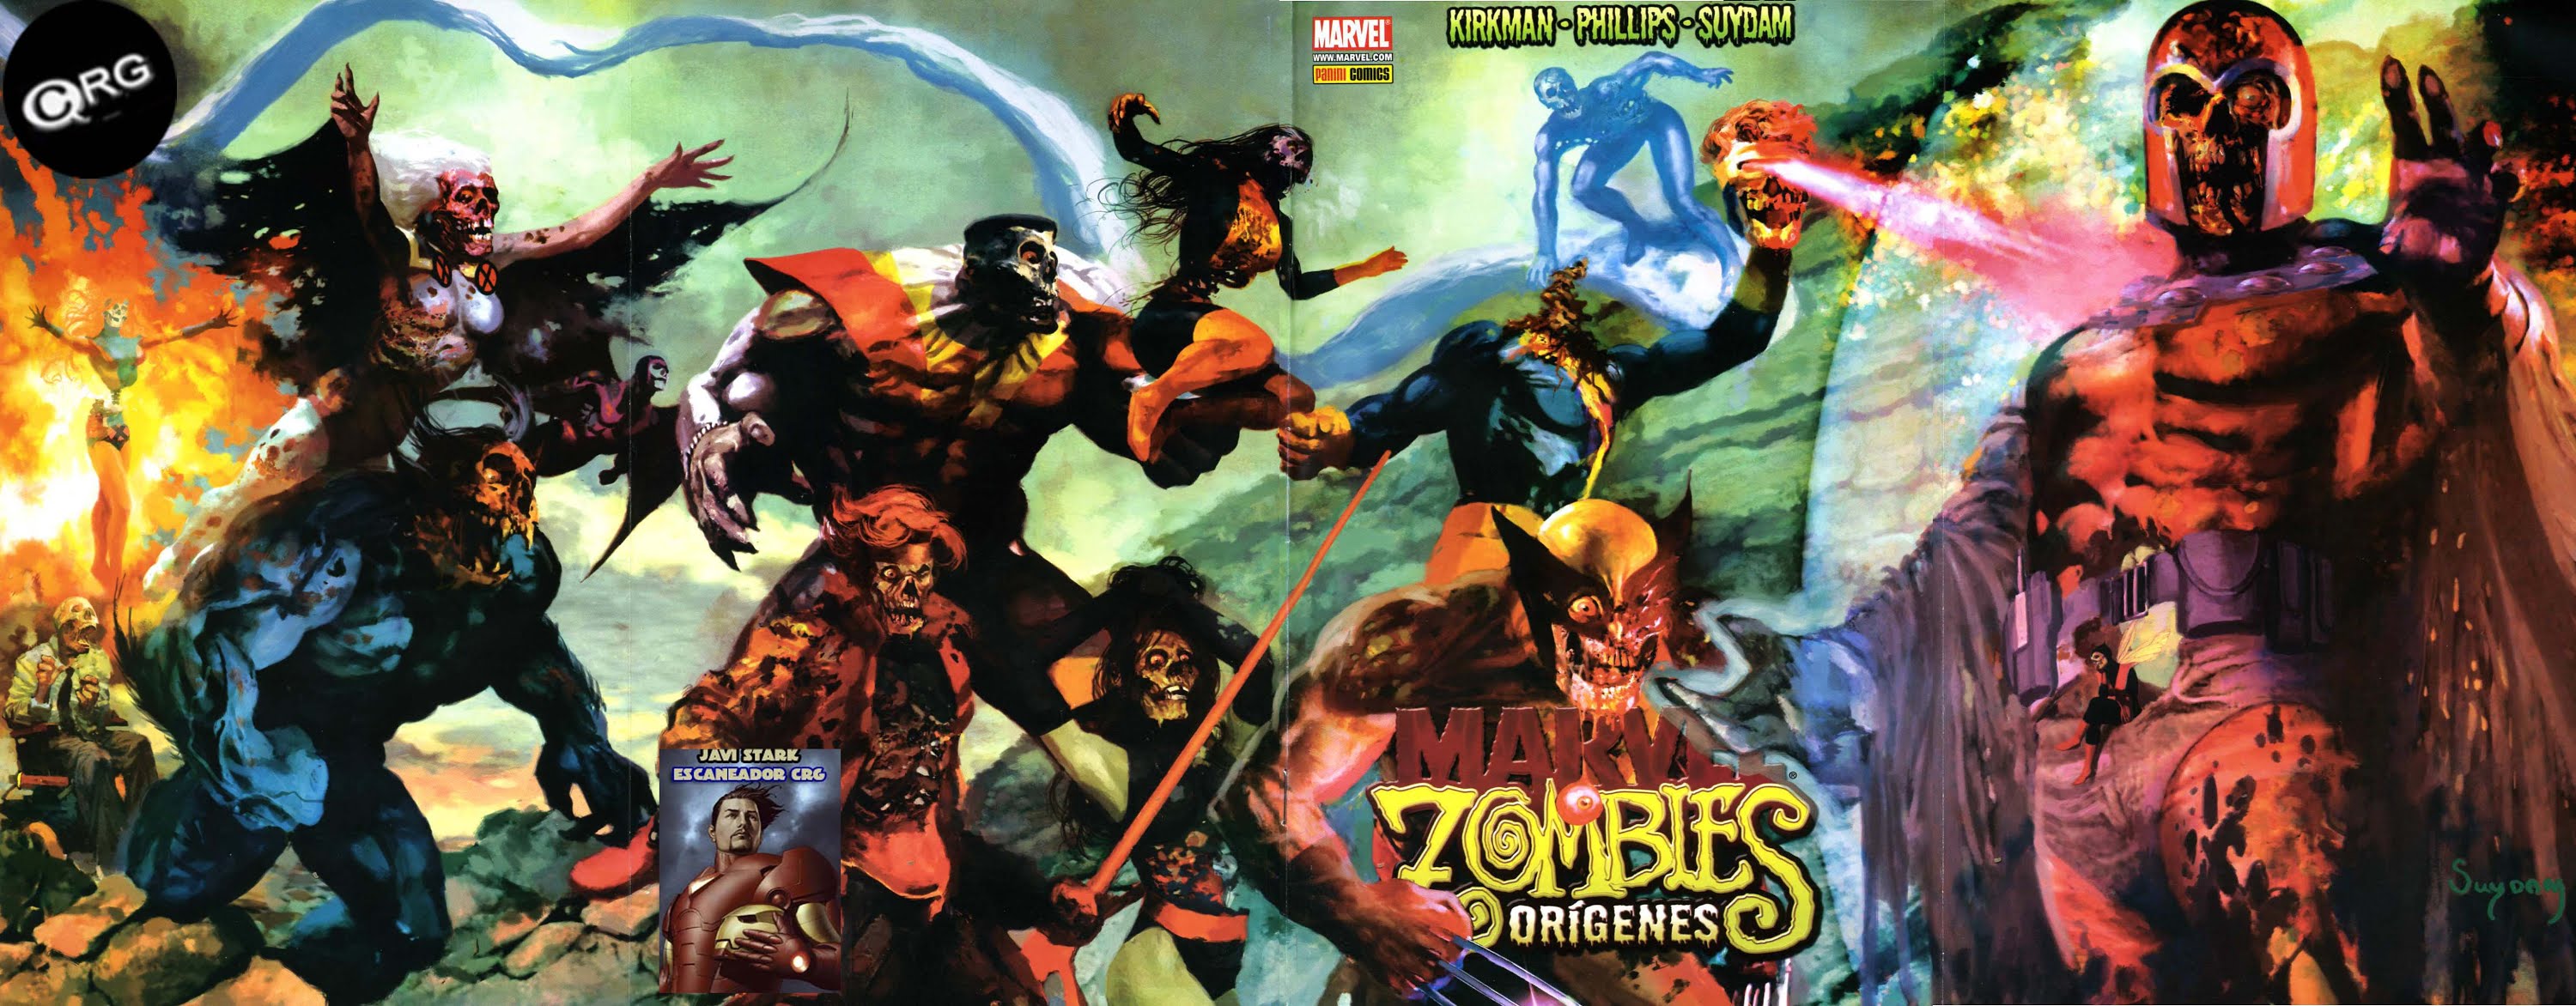 Marvel Zombies: Dead Days #18